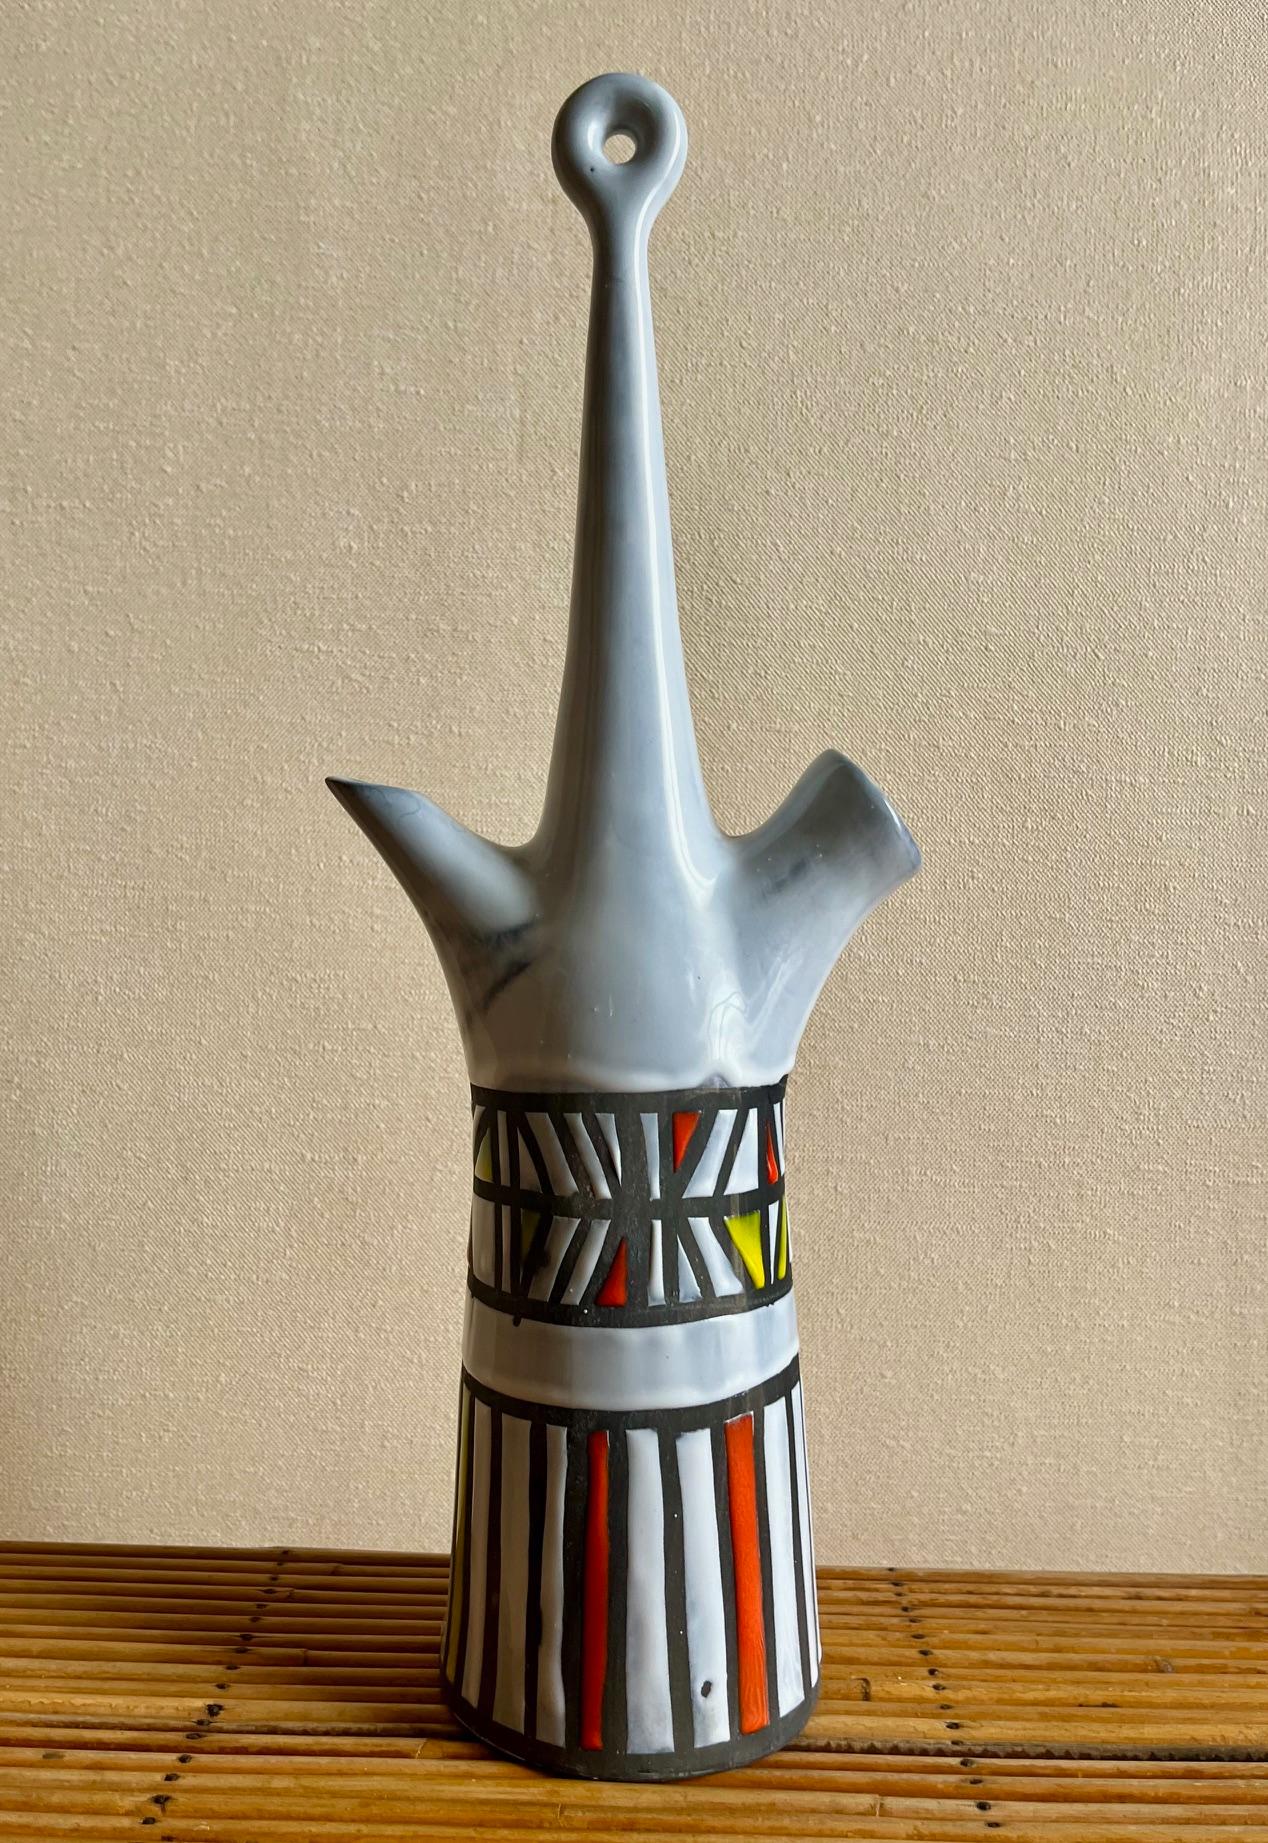 Long neck ceramic bottle or flask.
White glazed ceramic with geometrical red, yellow and black linear decoration.
For this shape, this is a rare example of an 